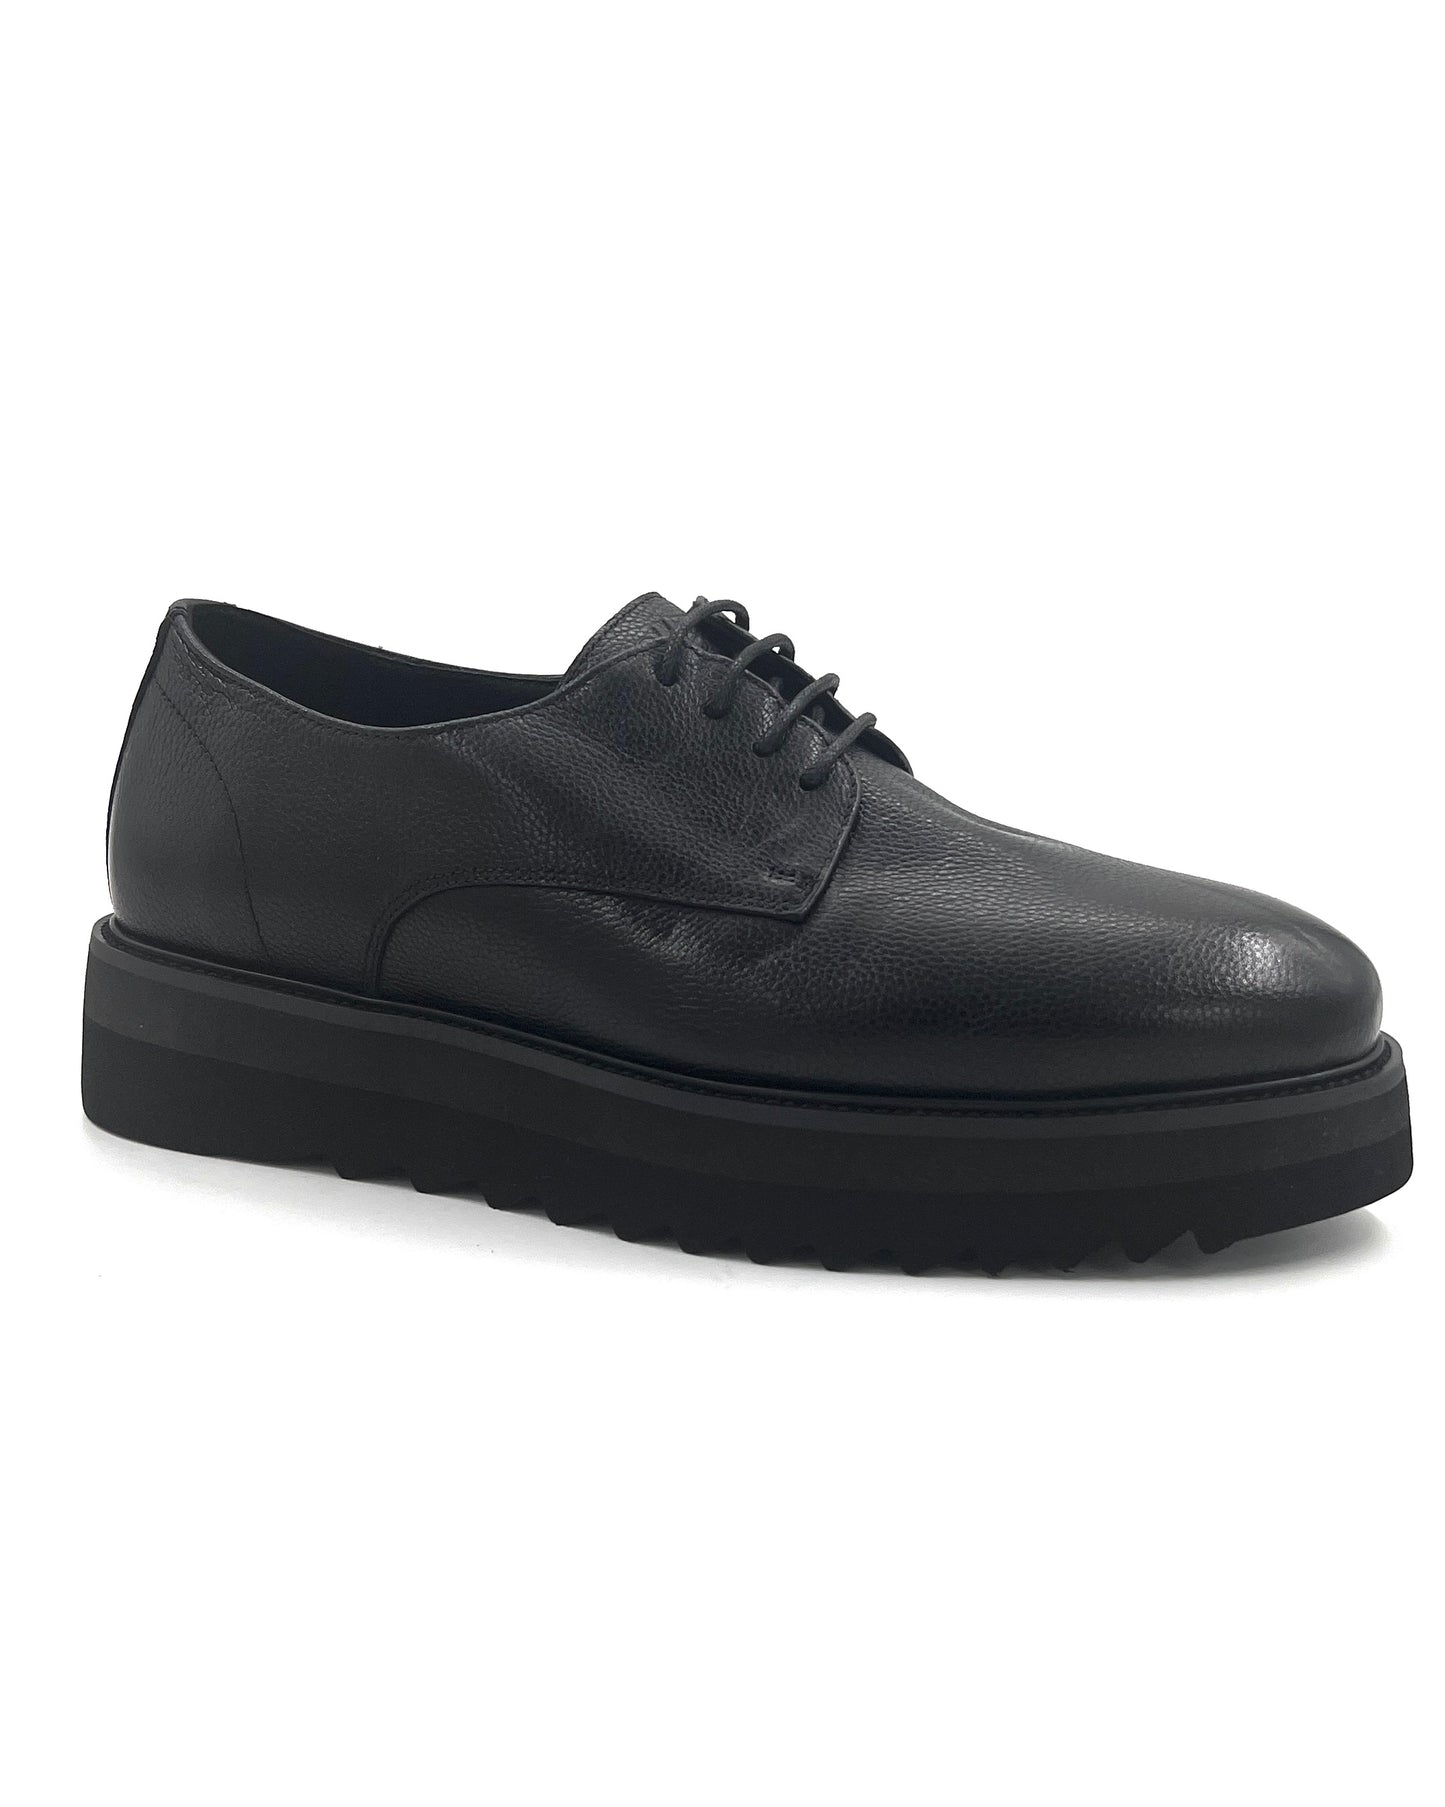 2H #S8018-97-04 Genuine Leather Black Casual Shoes